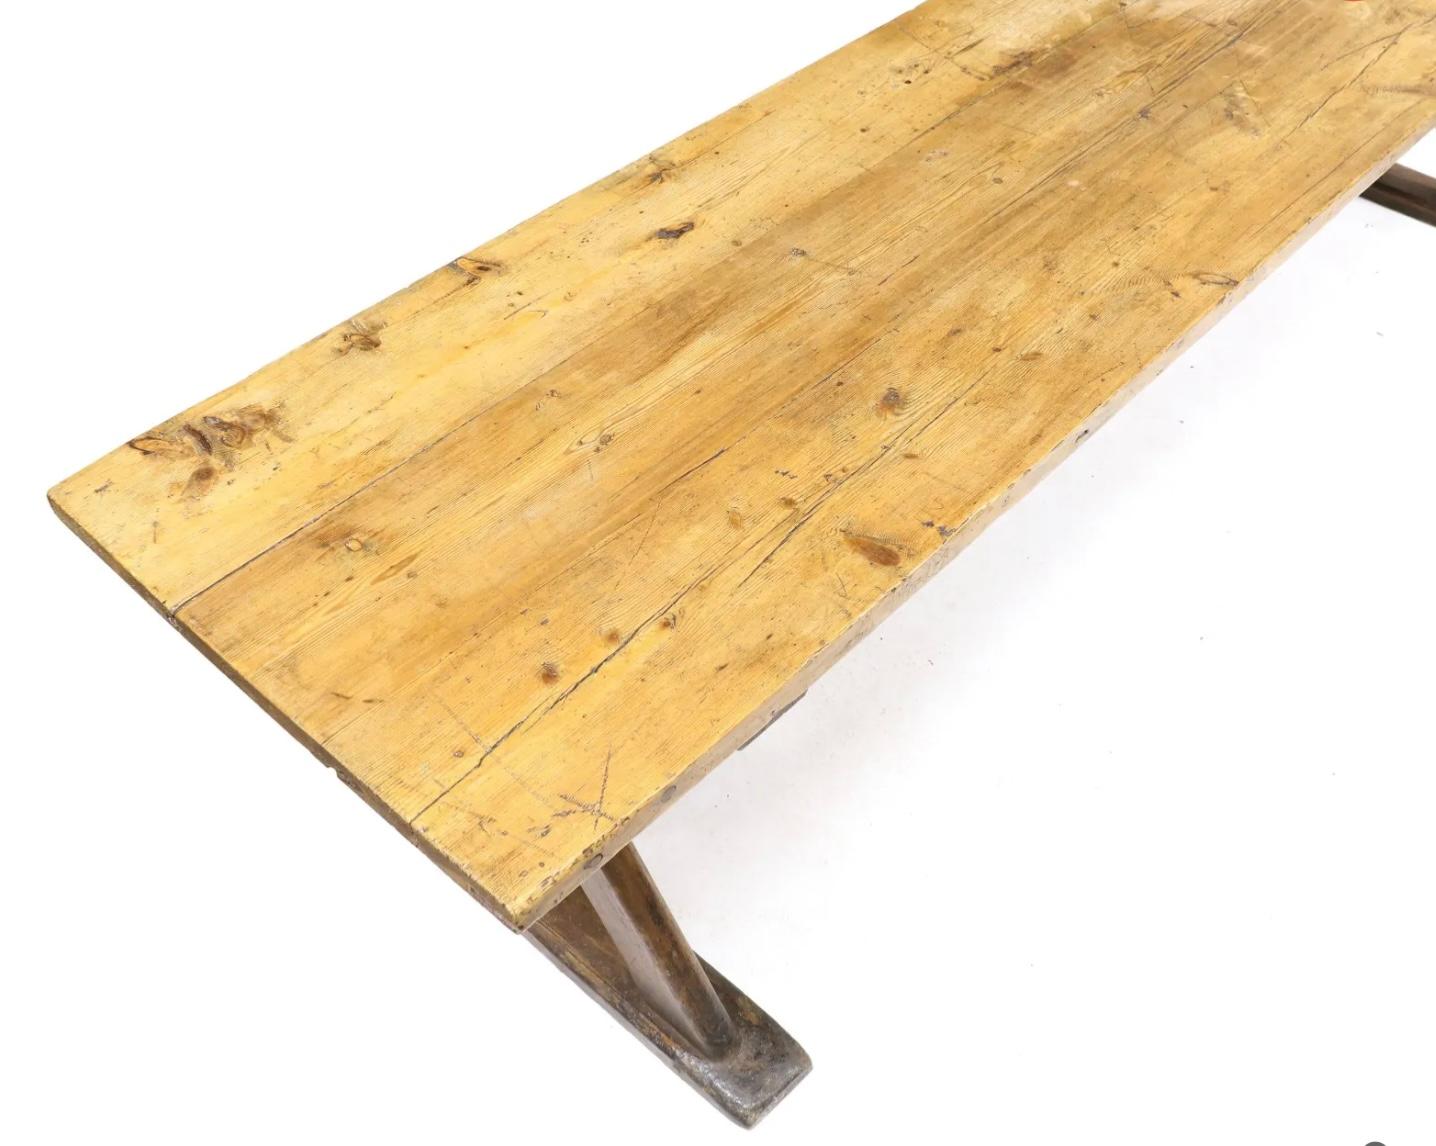 Antique Continental Pine Ten-Foot Farm or Trestle Table, Early 19th century. Two board rectangular pine top, two X-stretcher bases with chamfered corners, flat beveled shoe foot and iron trestle supports. Wonderful old scrubbed surface. 
